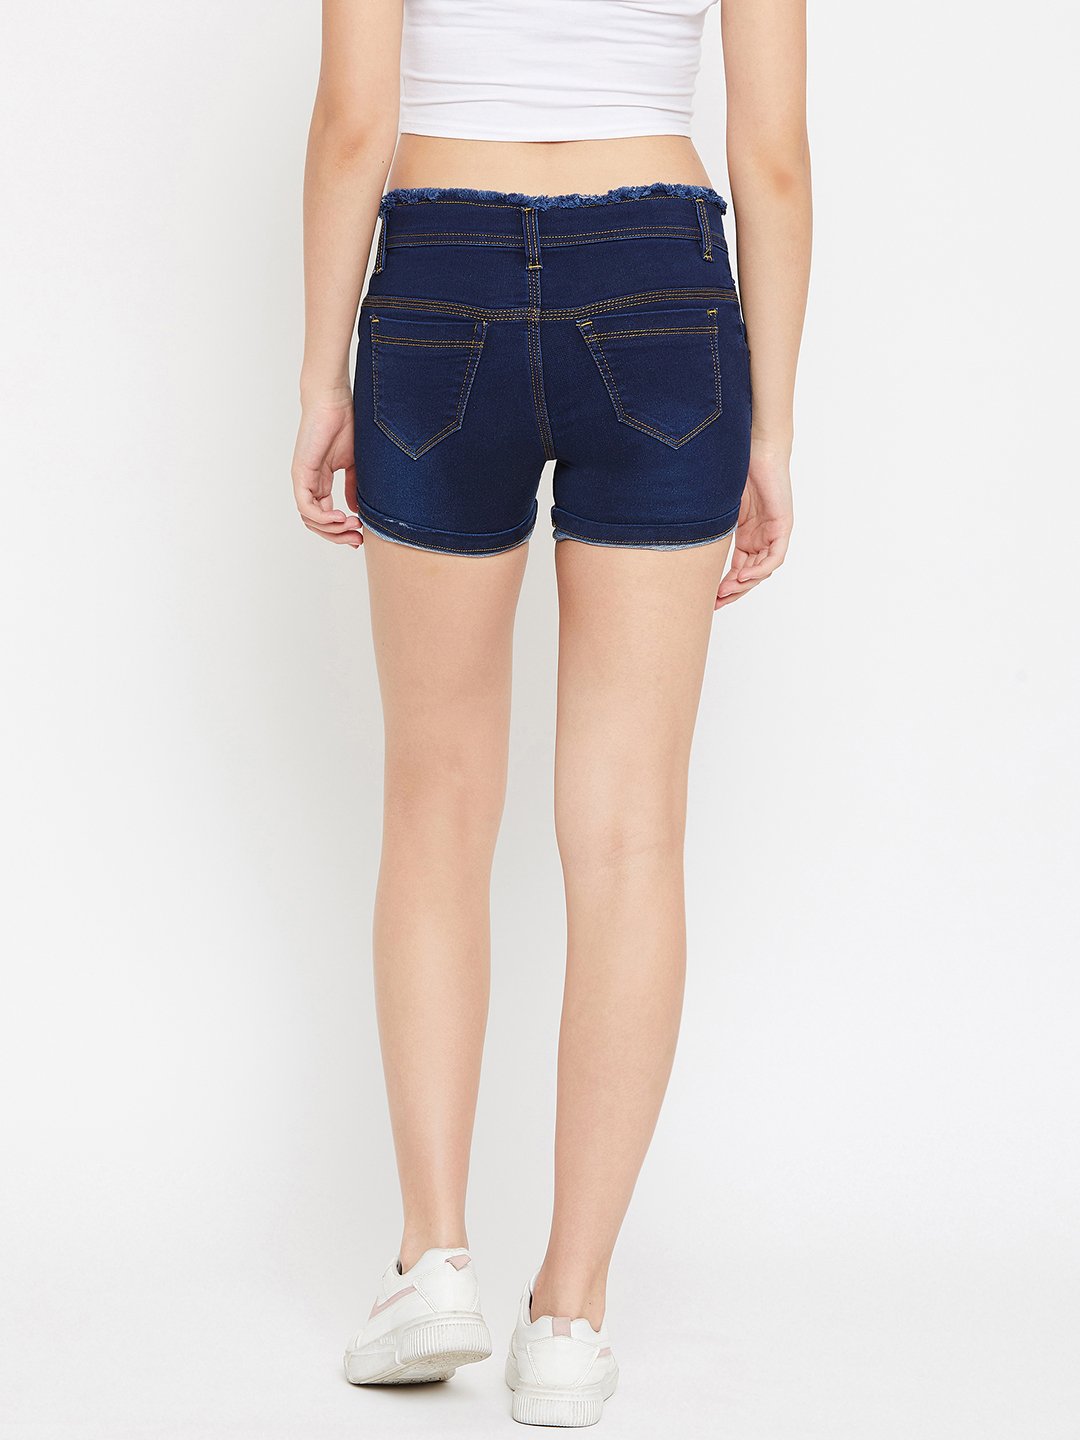 Stretchable with Whiskers Basic Blue Shorts - NiftyJeans